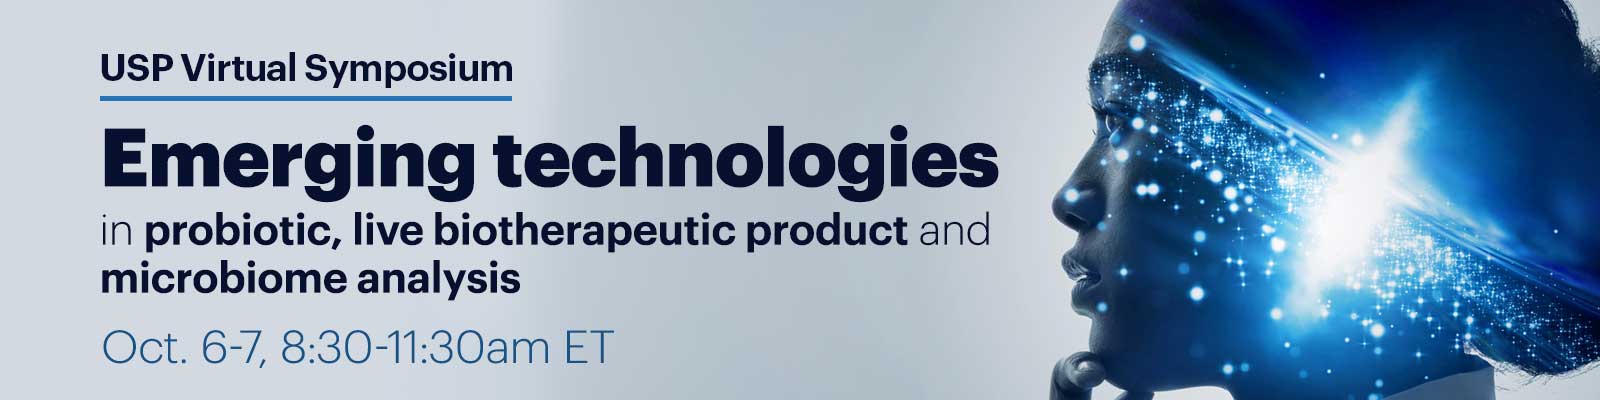 Emerging Technologies in probiotic, live biotherapeutic product and microbiome analysis